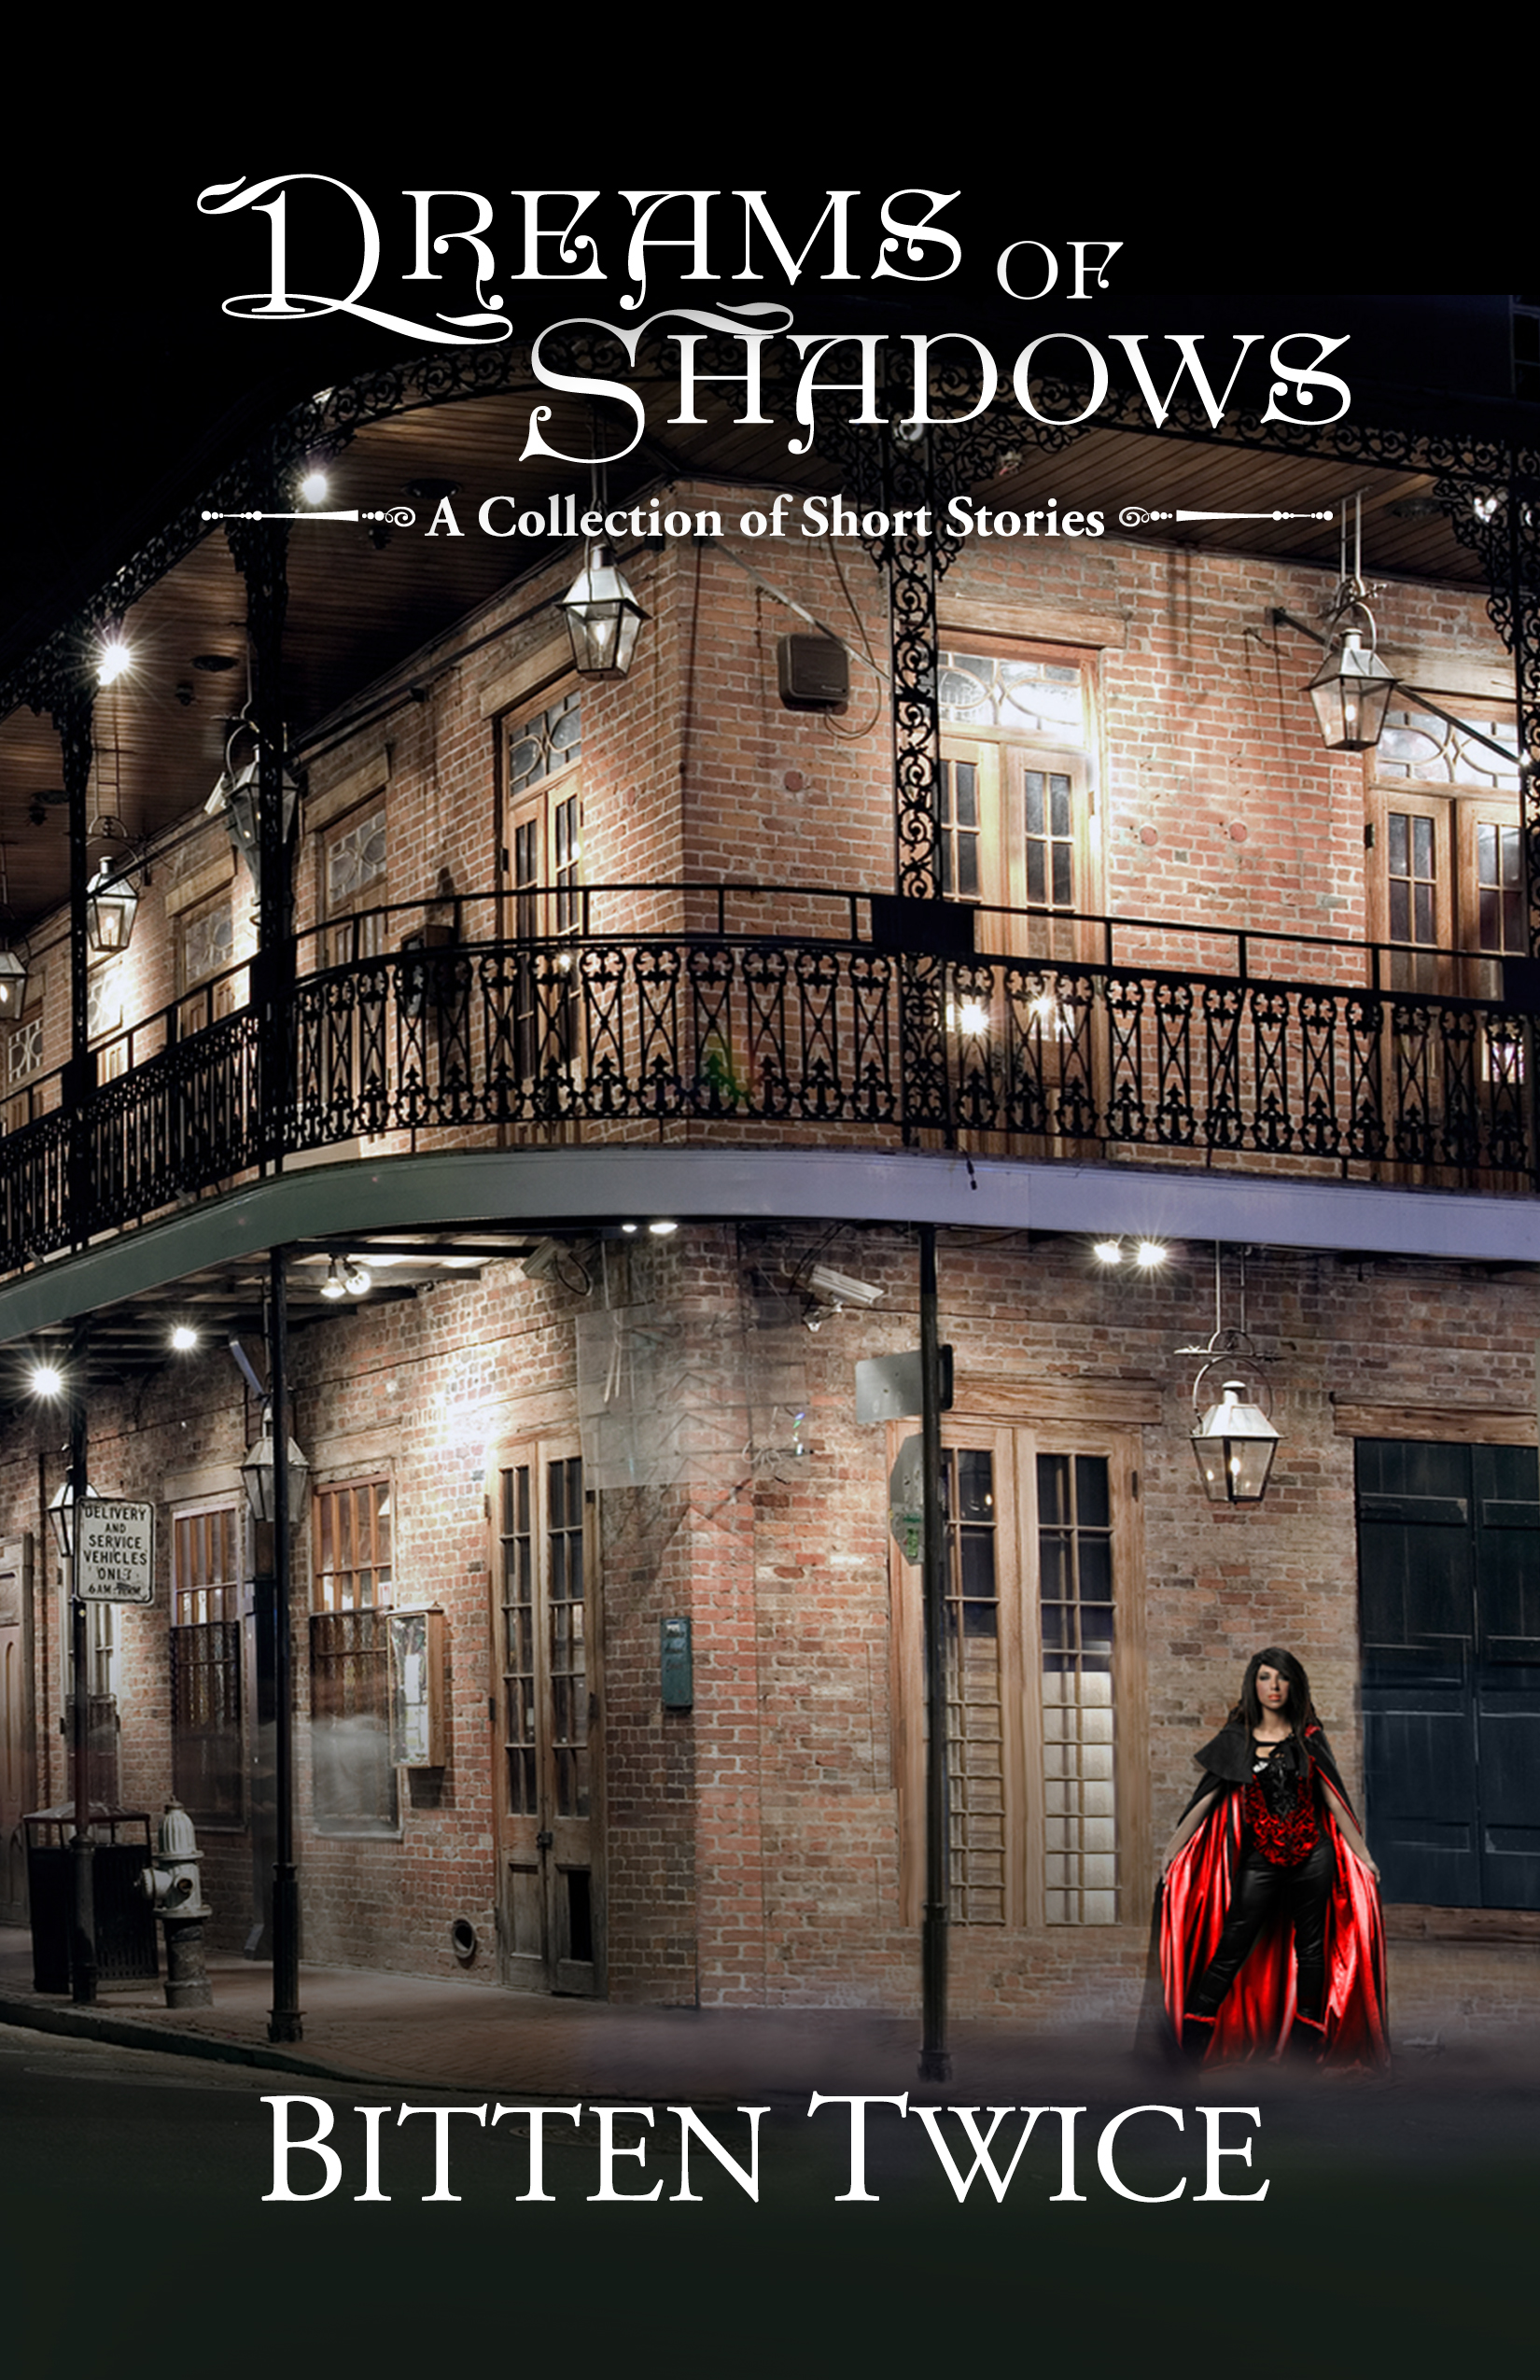 bookcover image shows a woman with a red-lined cape wearing a corset and pants standing outside a typical New Orleans brownstone corner house